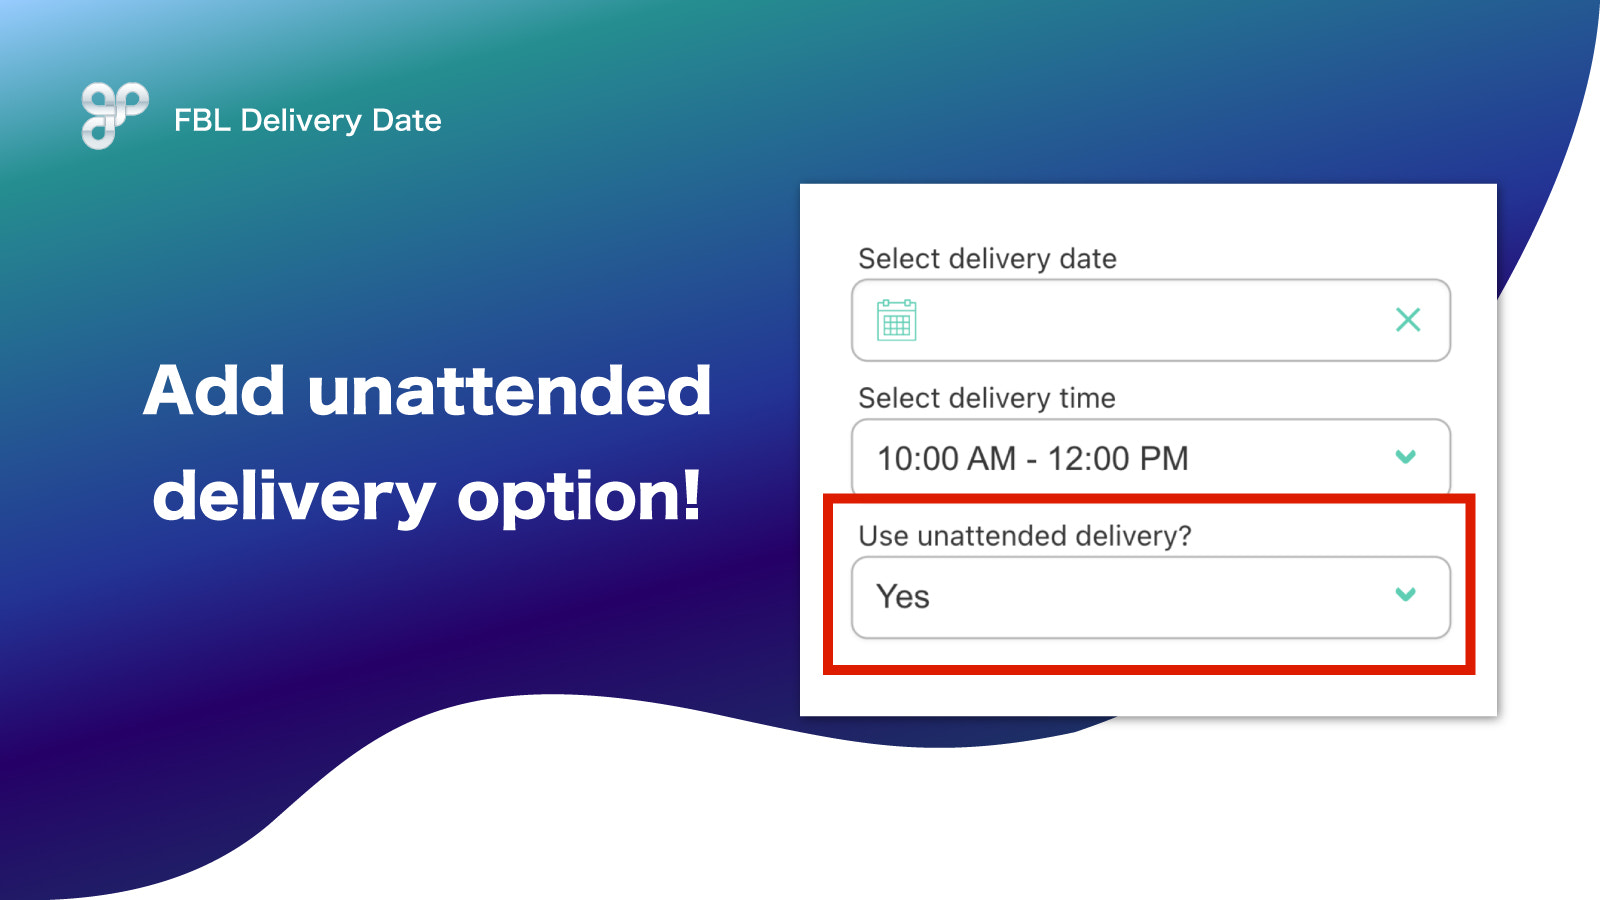 Add unattended delivery option